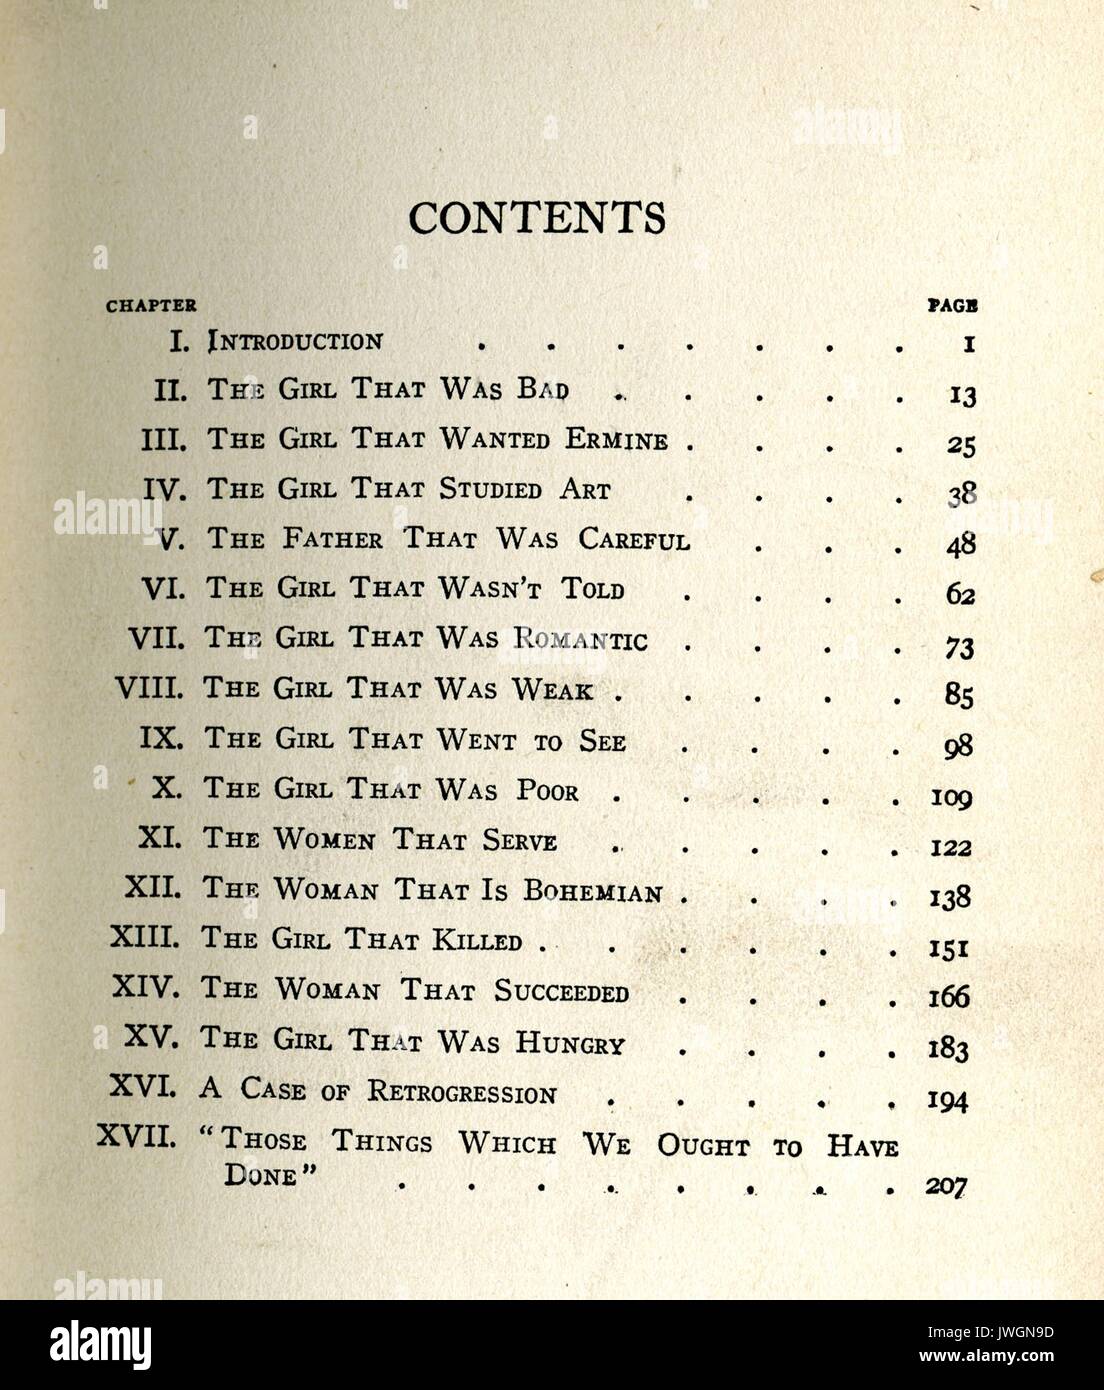 Table of contents showing stories in The Girl that Goes Wrong, by Reginald Wright Kauffman, an early book about prostitution and human trafficking in New York City, 1911. Stock Photo